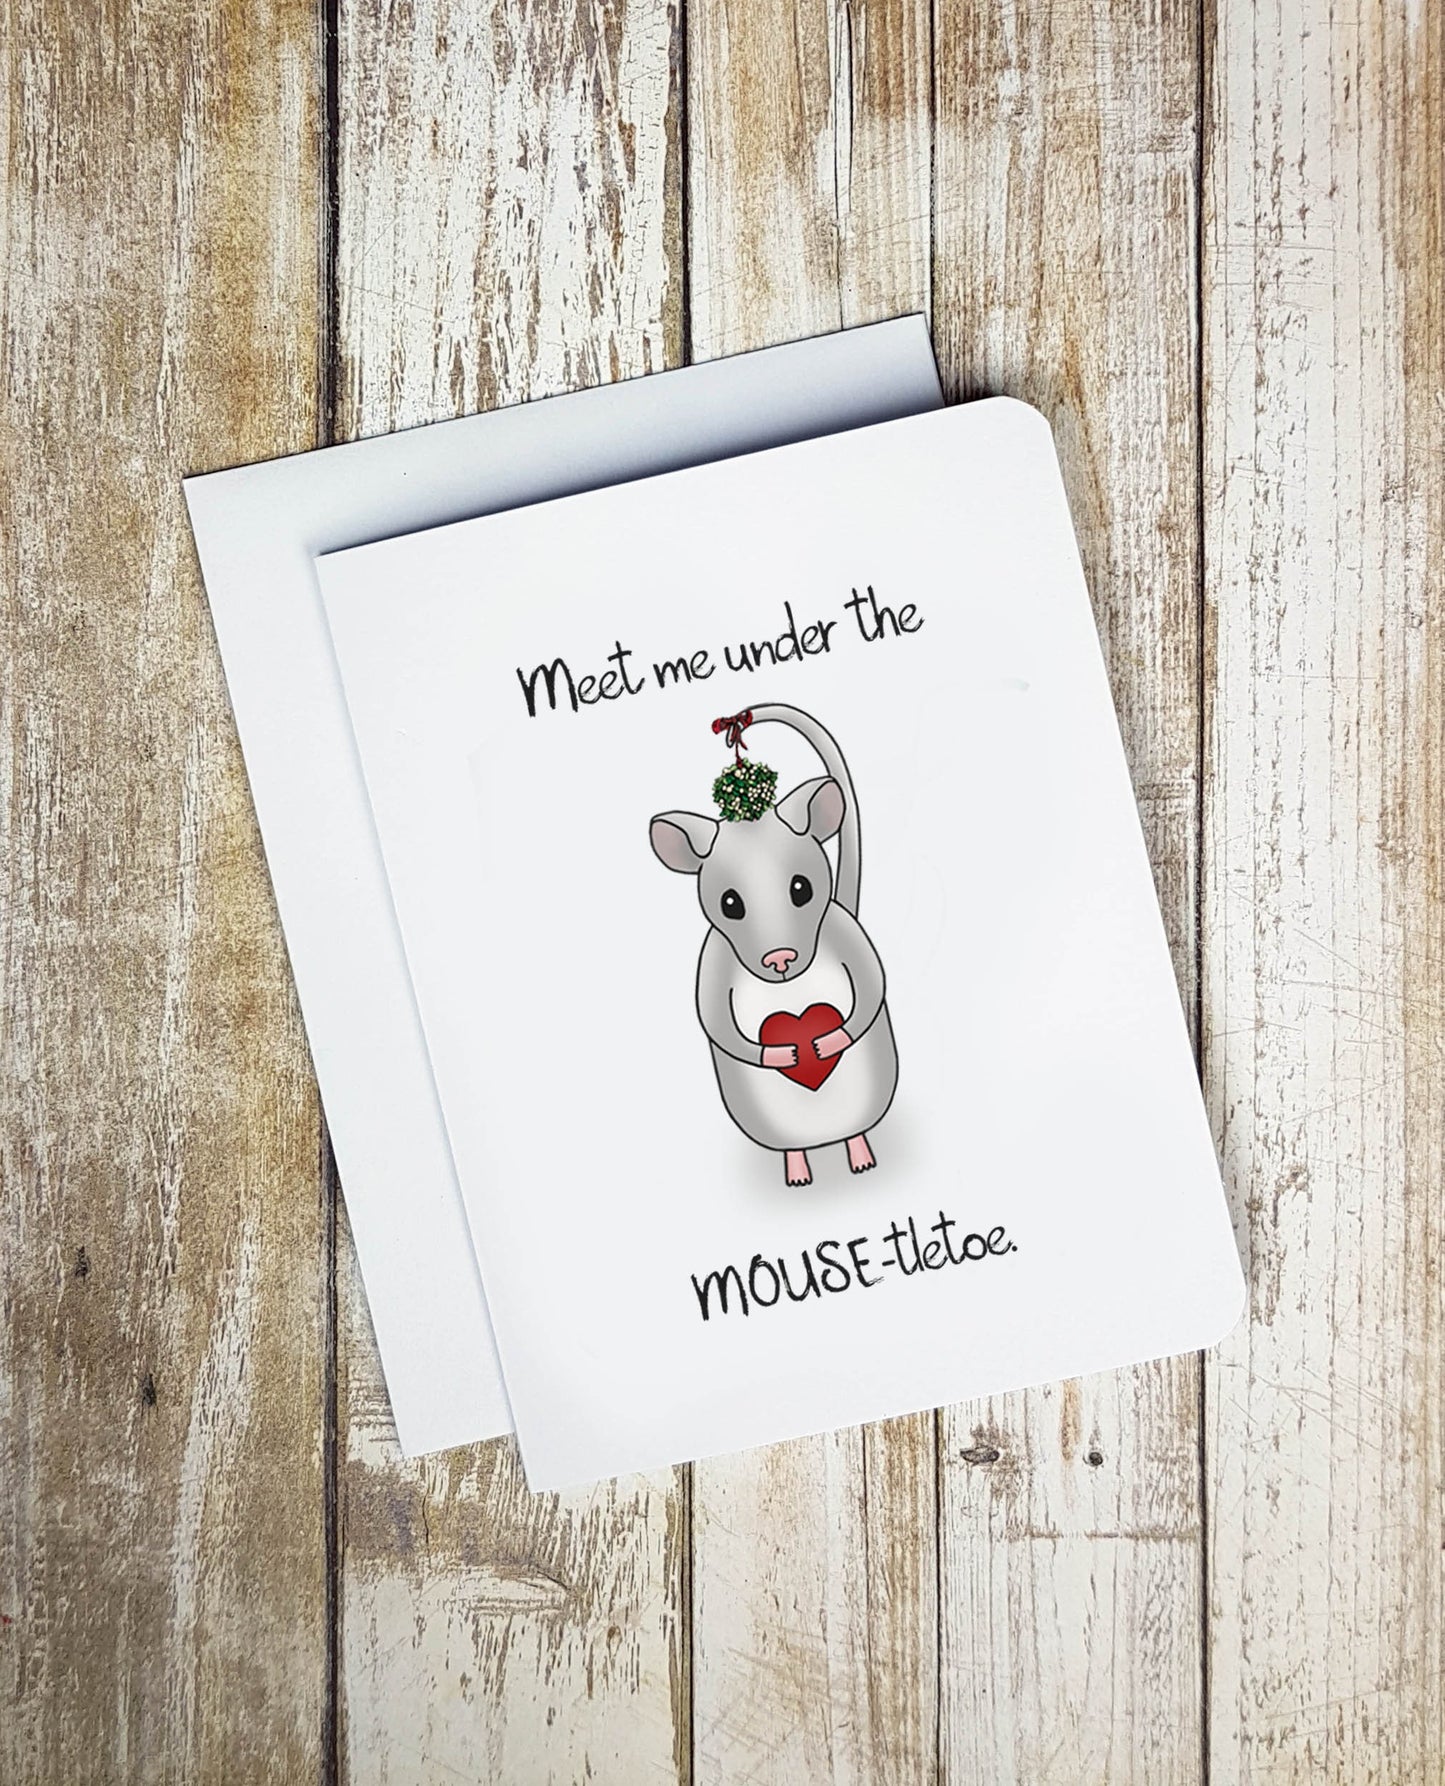 Meet Me Under The Mouse-tletoe Card